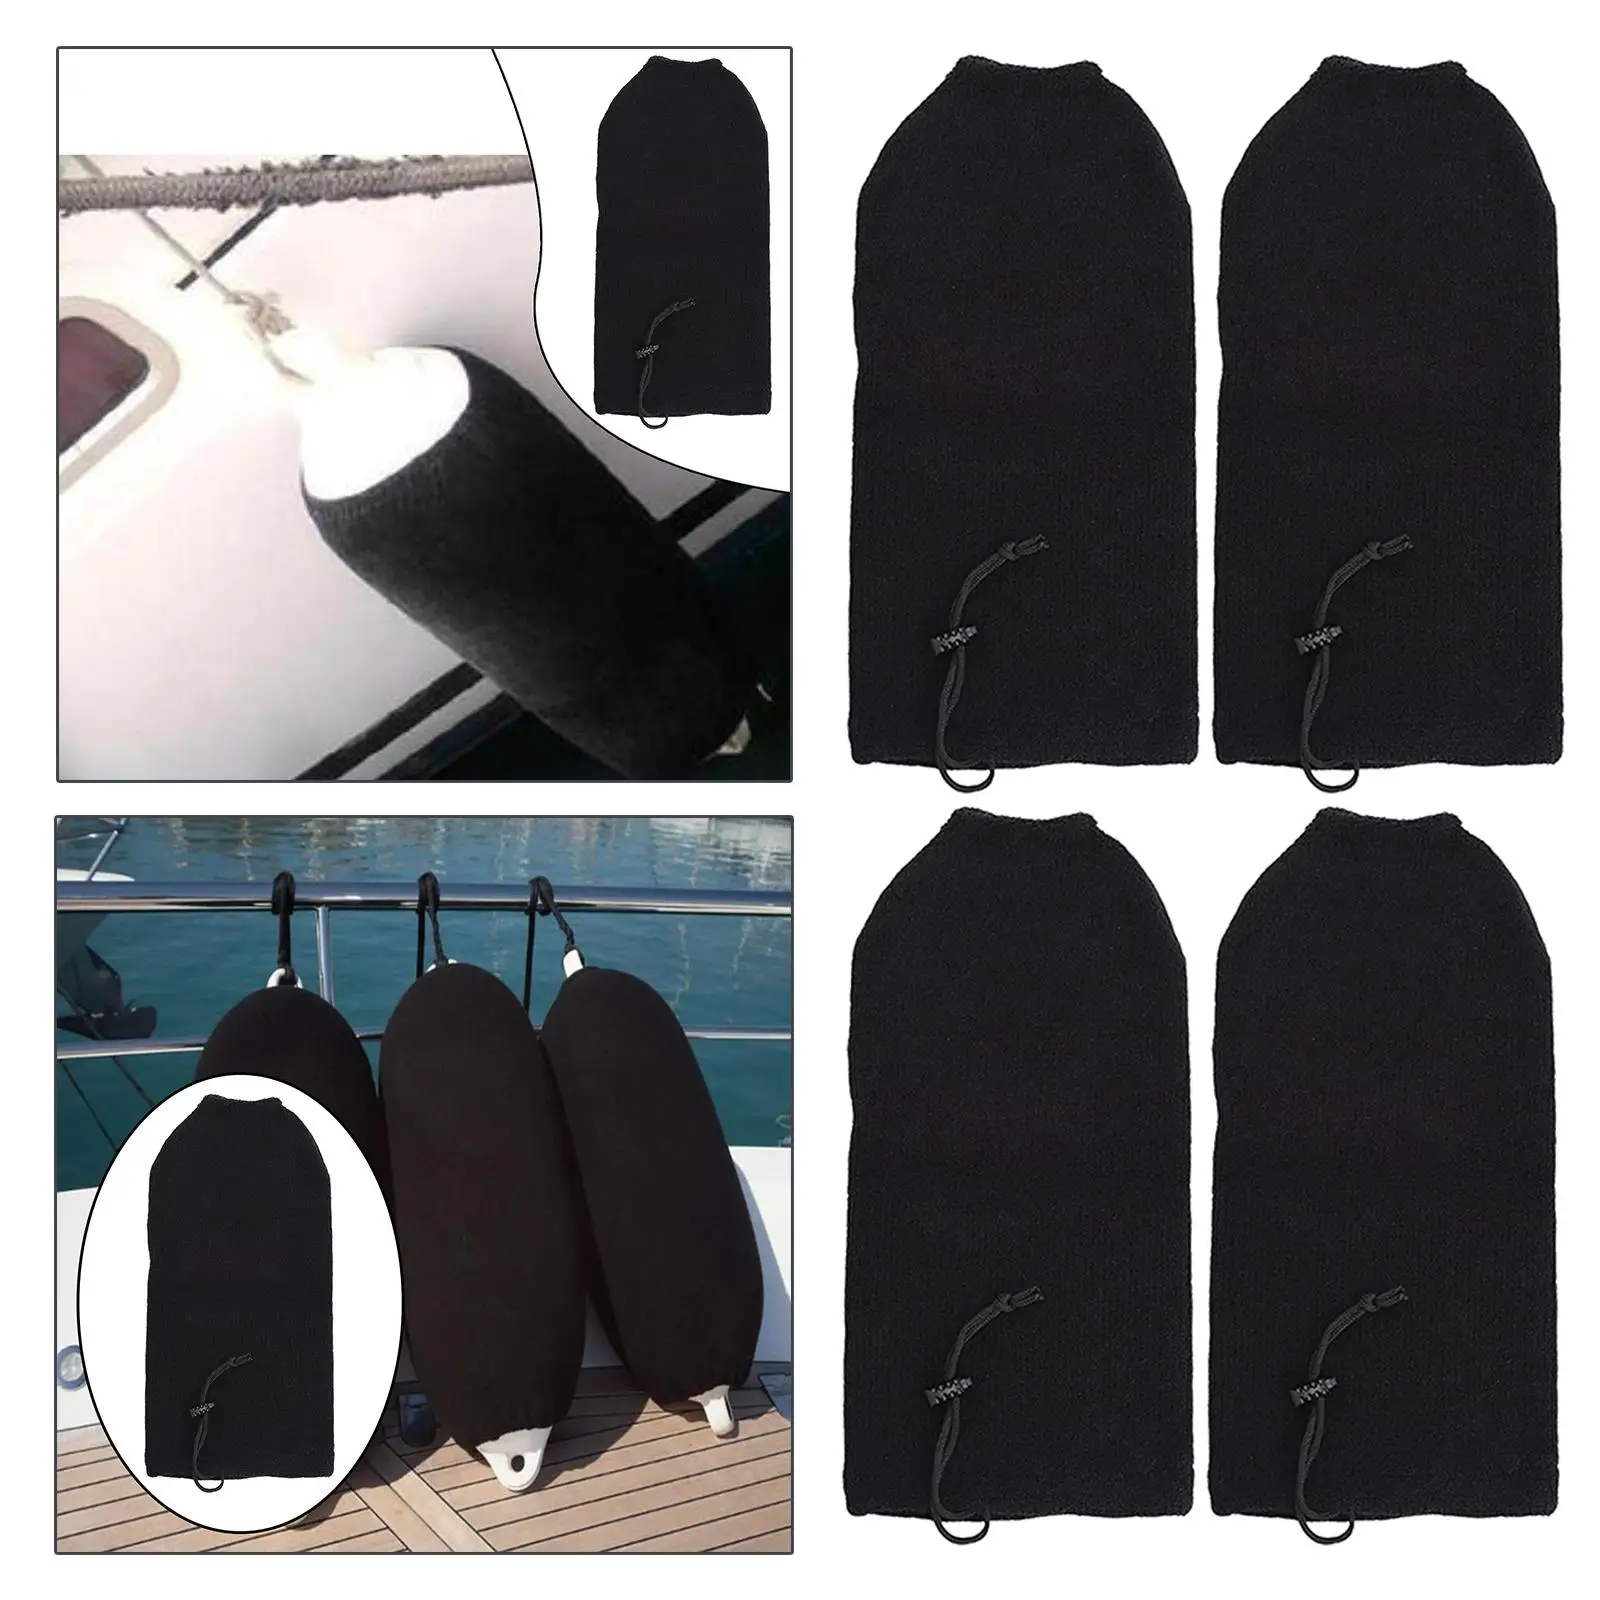 4x Boat Mudguard Cover, Soft Acrylic Woven Cover Protection for Marine Bumper